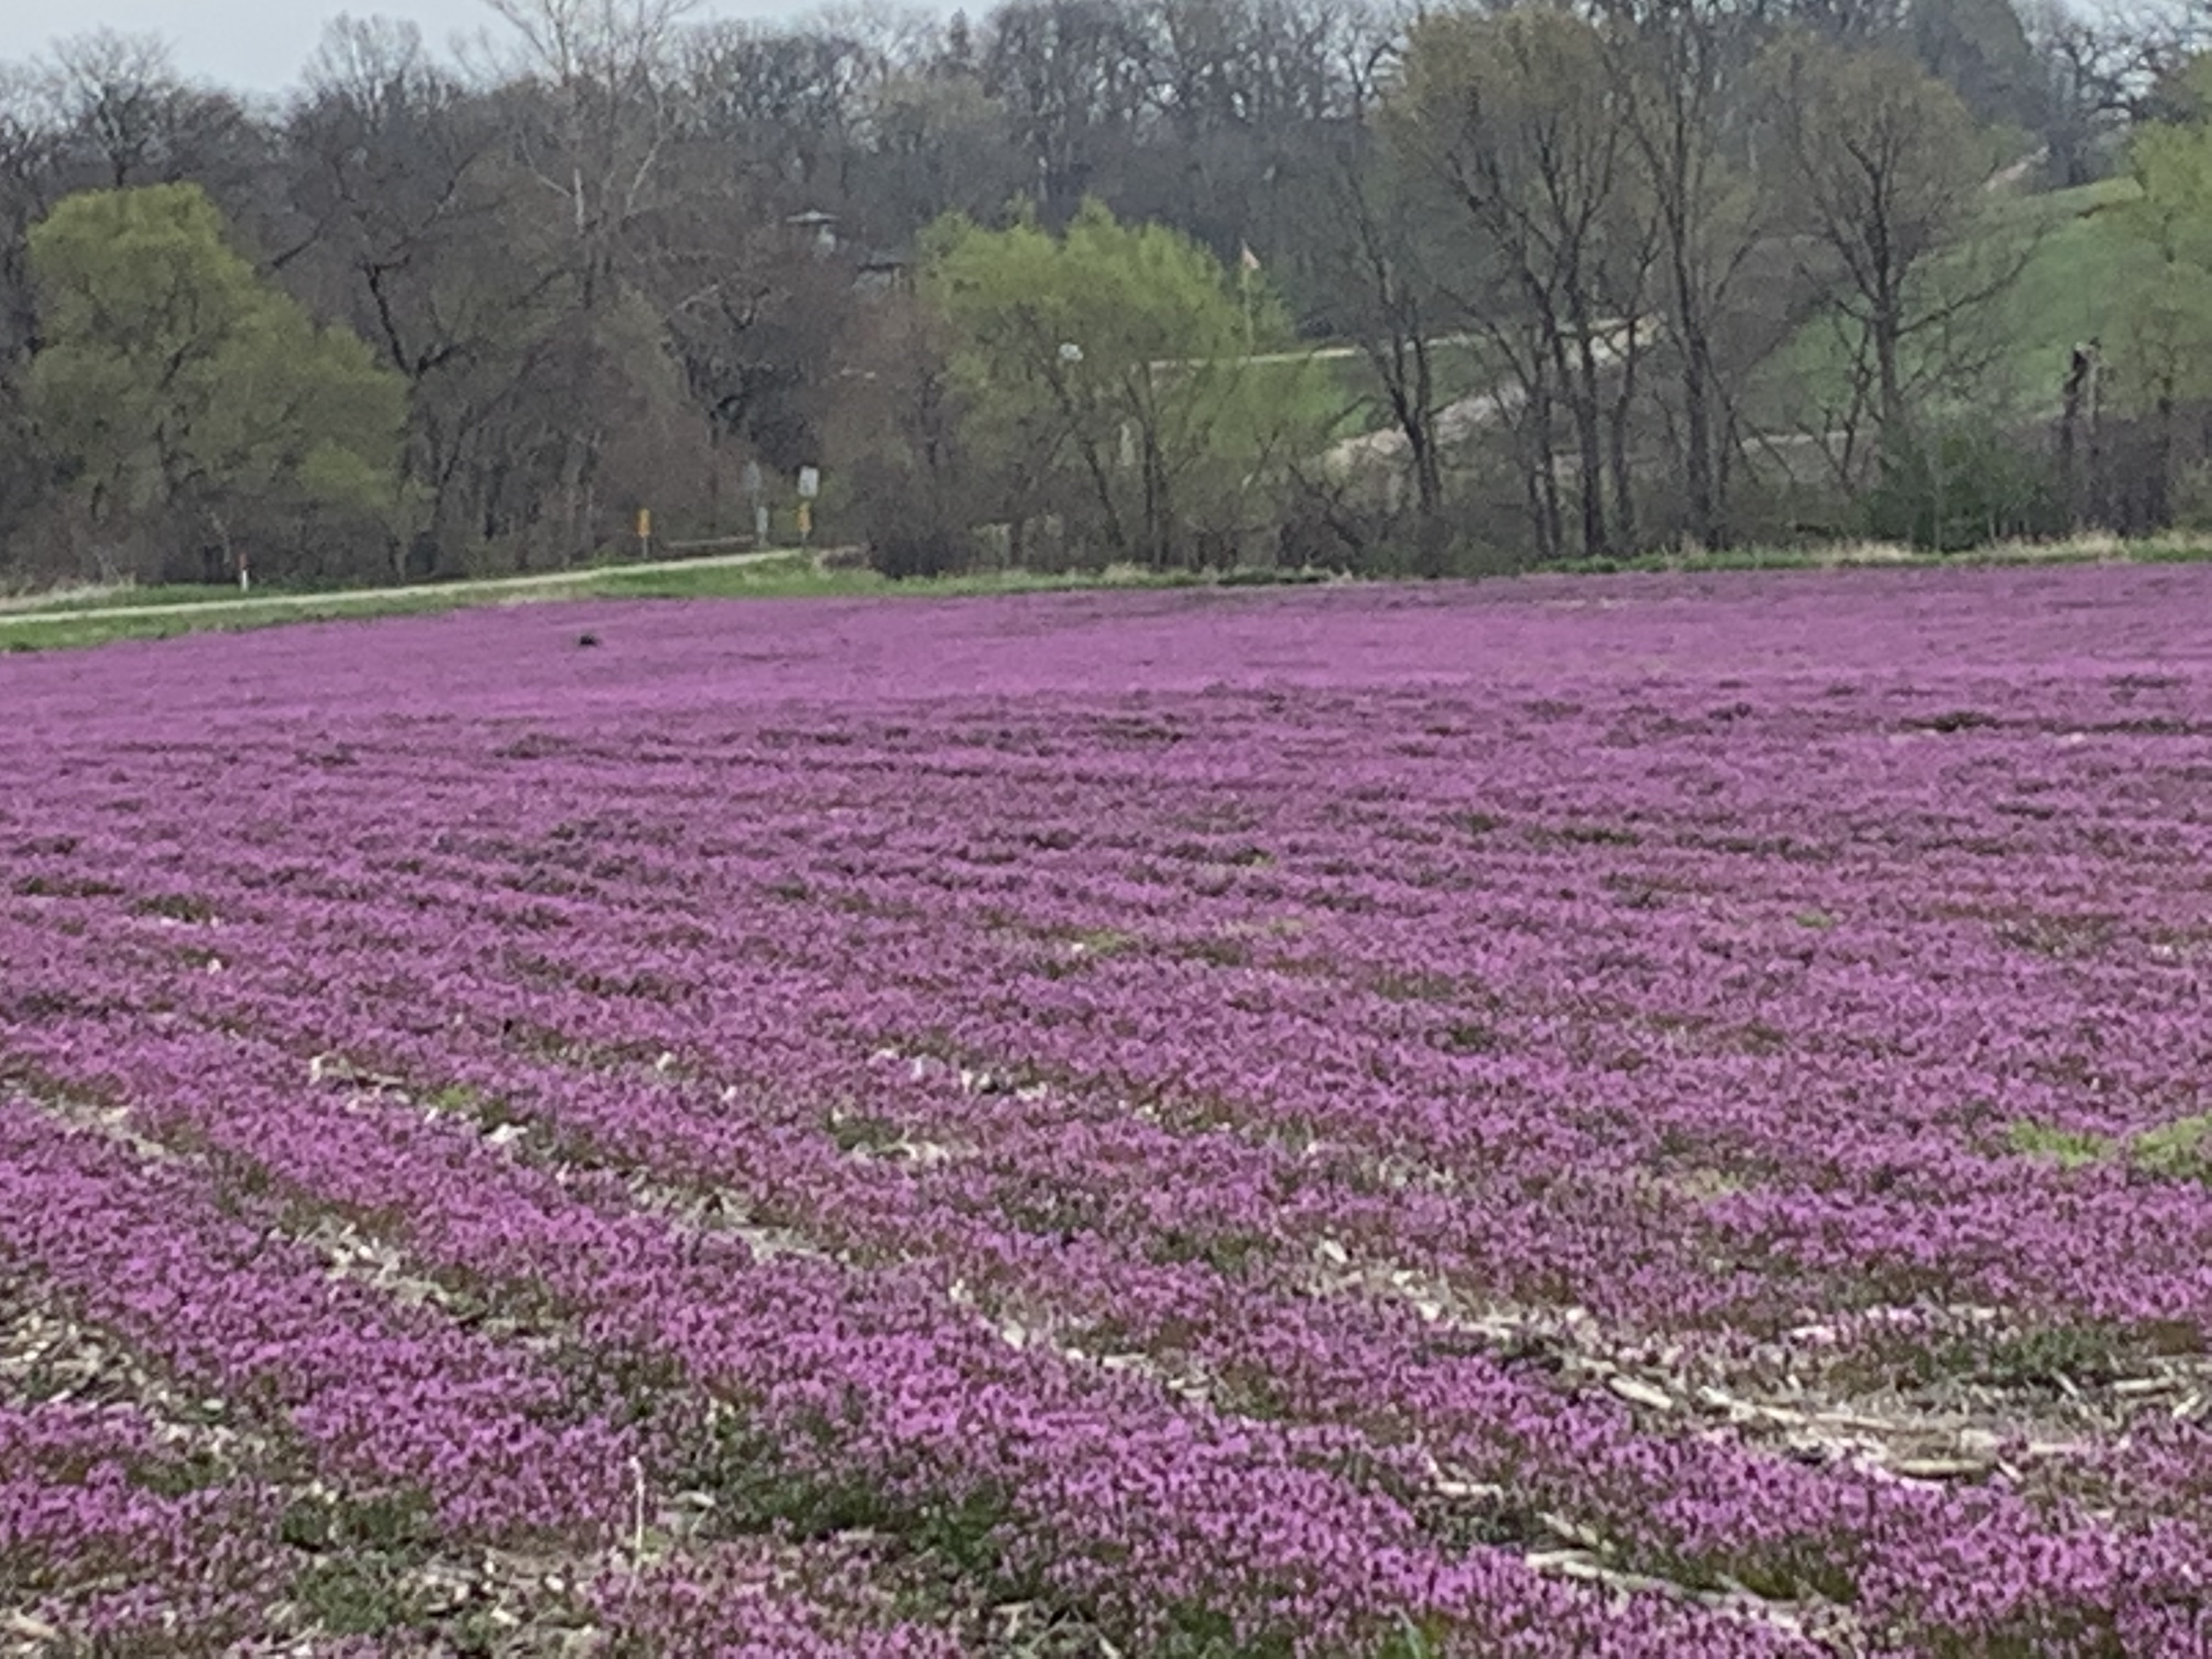 Last season's bean field is coming alive with a solid mat of purple. Volunteer henbit, sprouted from seeds dropped in yeras past. Soon this carpet of color will be obliterated by a herbicide to make way for a cornfield.